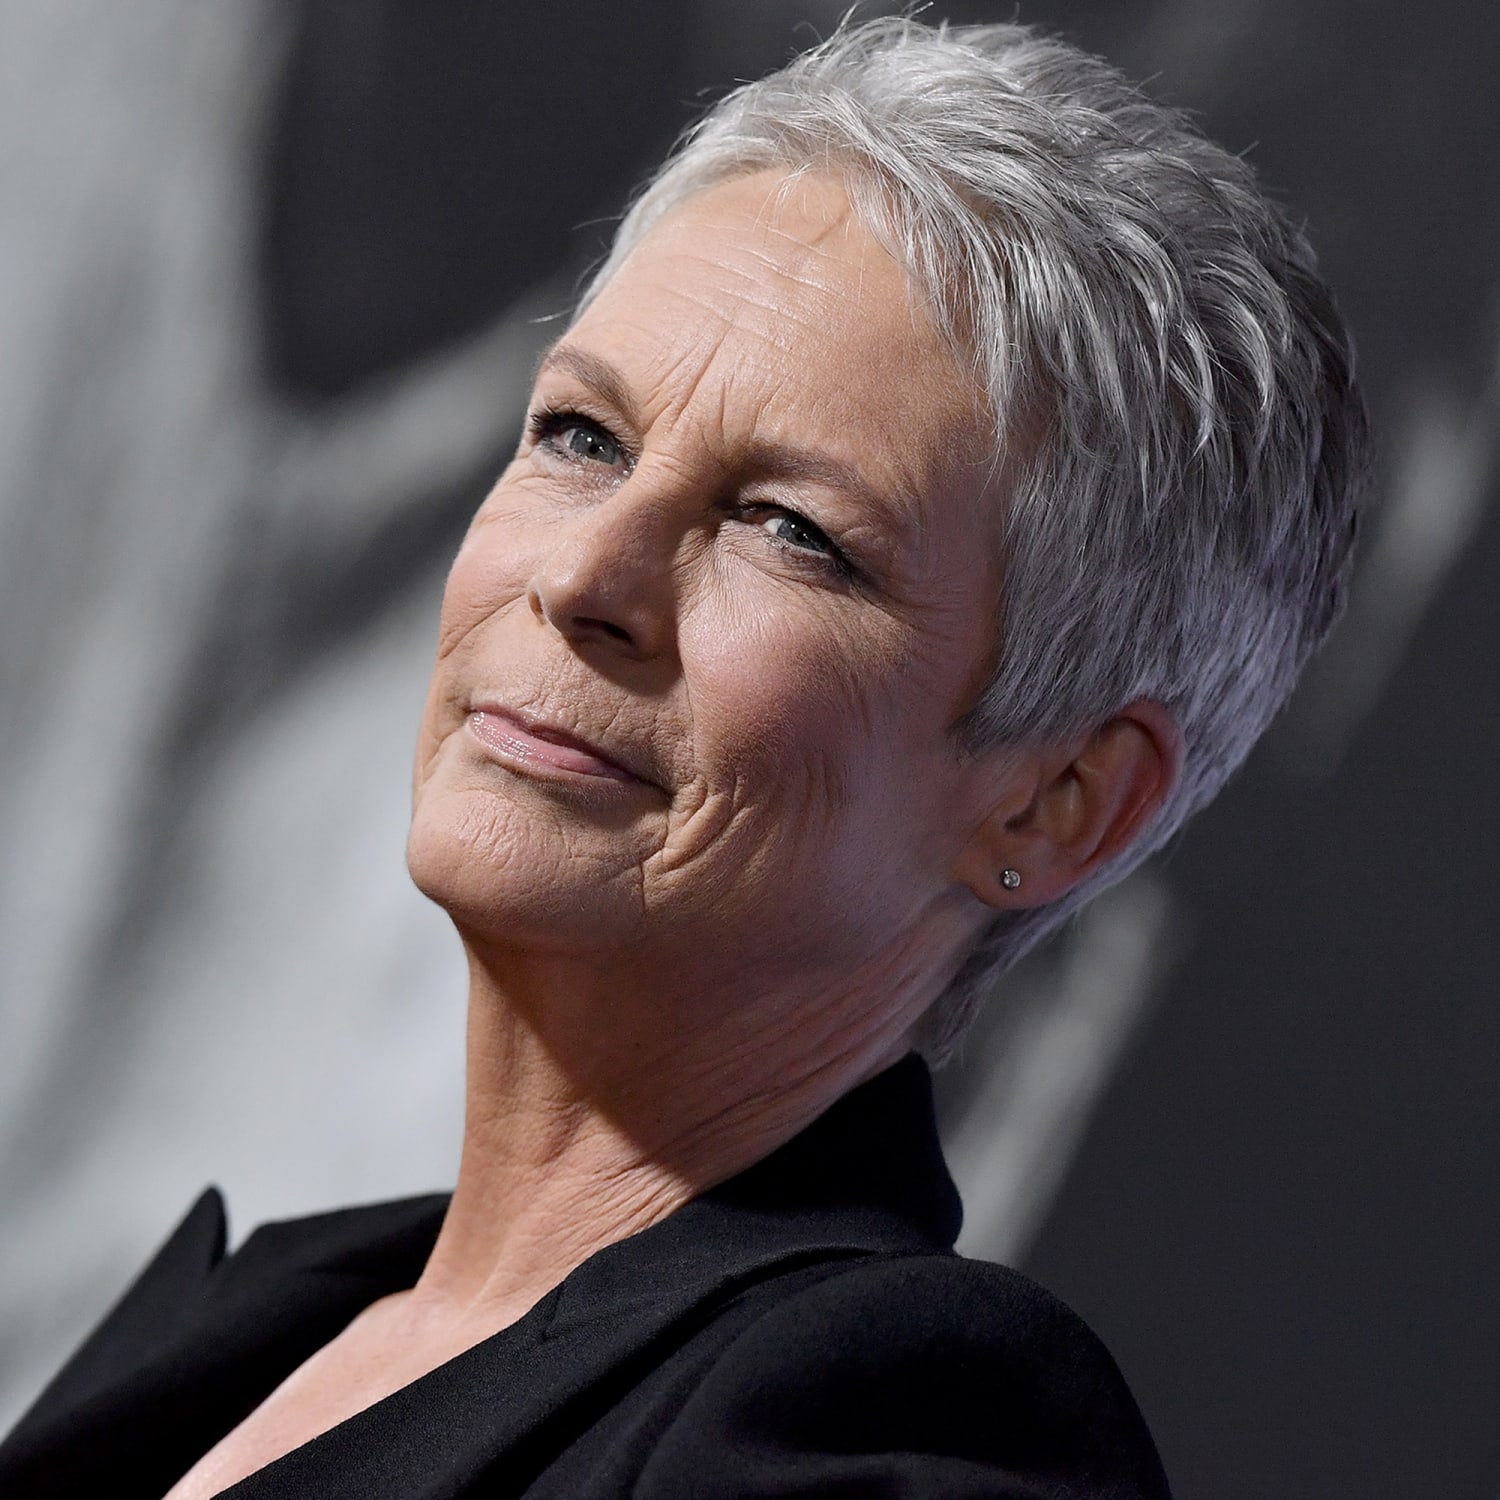 Jamie Lee Curtis speaks out about her opioid addiction